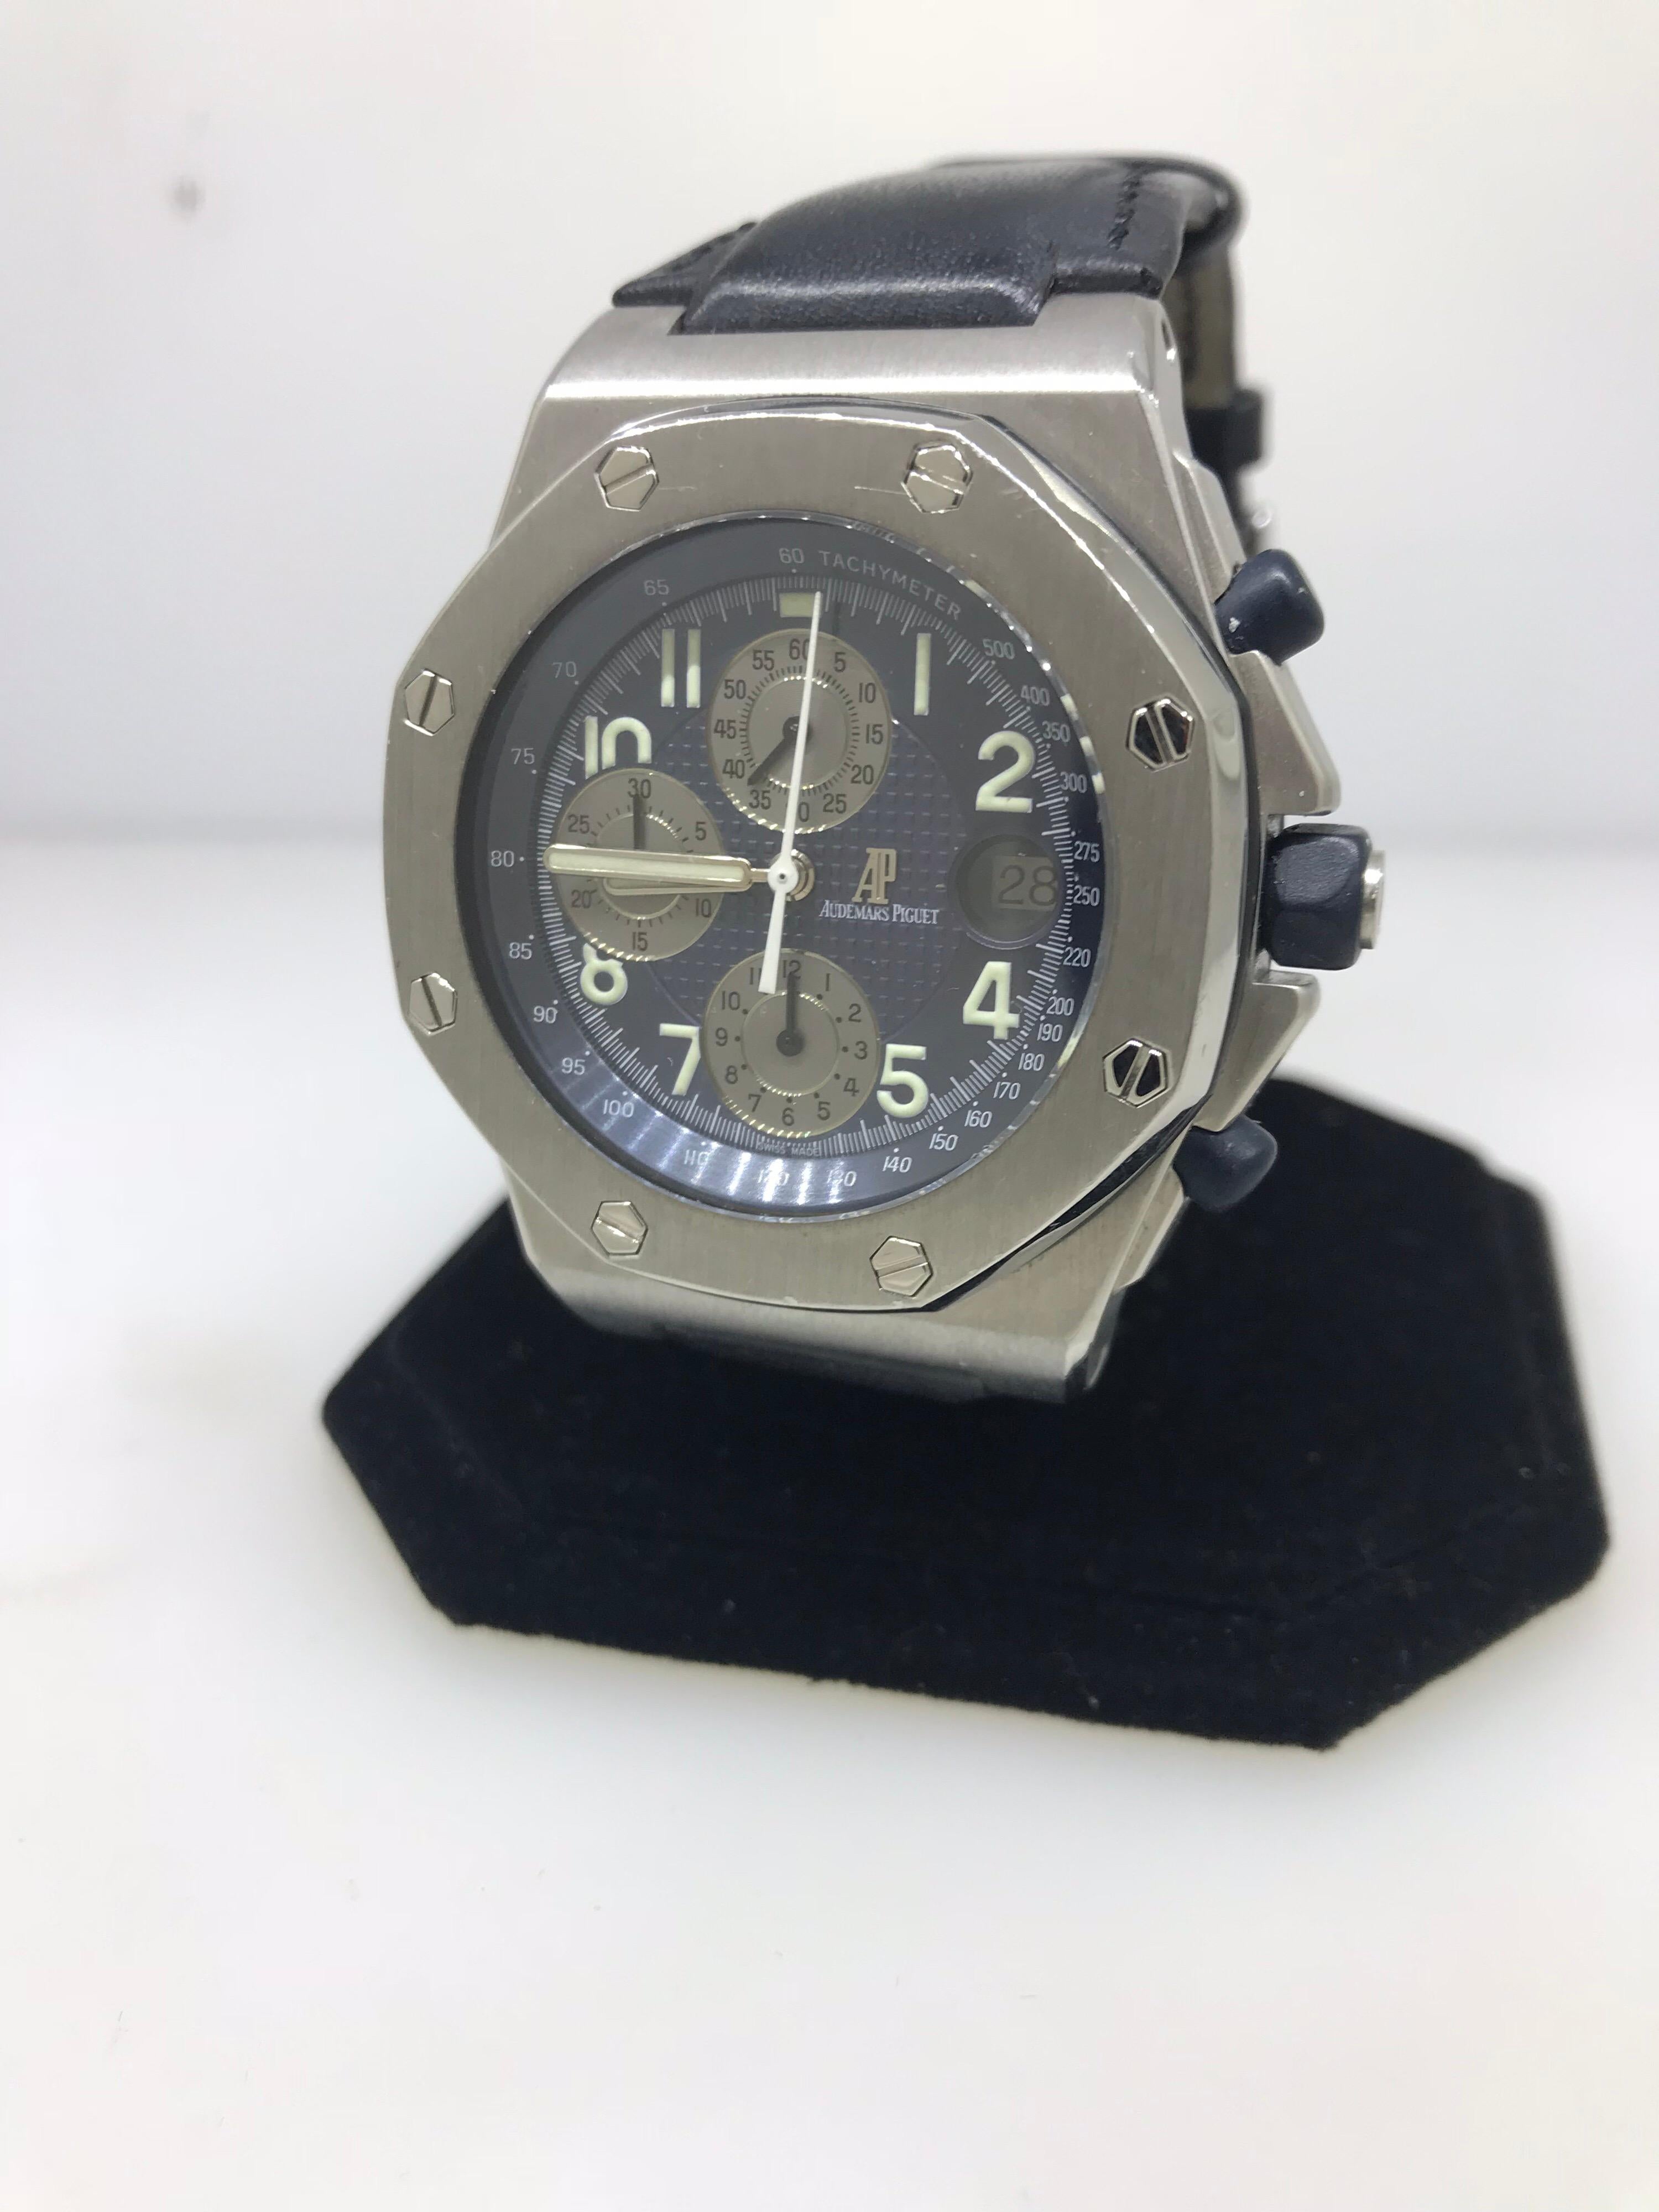 Audemar Piguet Royal Oak Offshore Men's Watch

Model Number: 25721ST.OO.1000ST.05

100% Authentic

Preowned in excellent condition

Comes with a generic watch box

Stainless Steel Case & Buckle

Blue Dial & Gray Subdials

Swiss made Self-winding